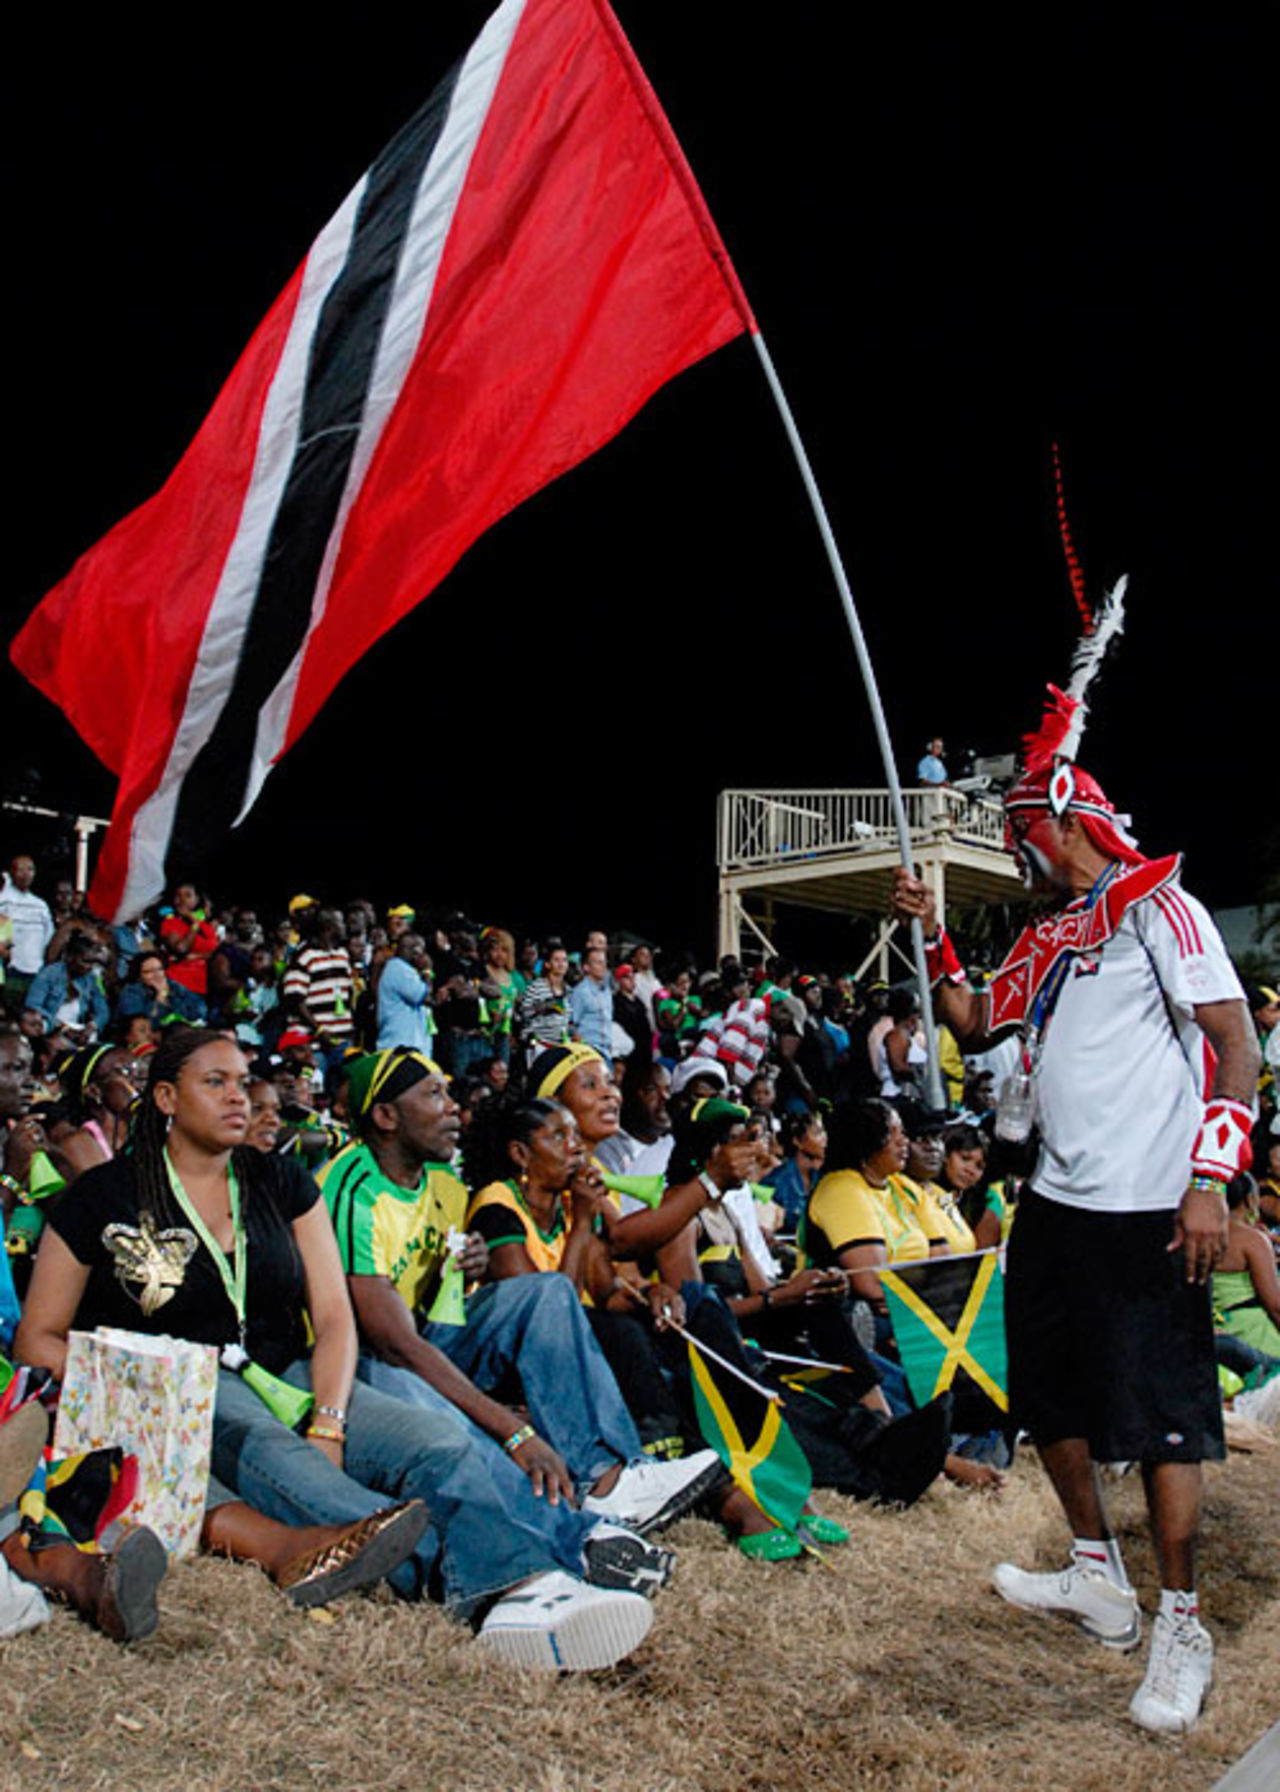 A Trinidad fan adopts a dangerous strategy at the Stanford20/20 final, Jamaica v Trinidad, Stanford 20/20 final, February 24, 2008